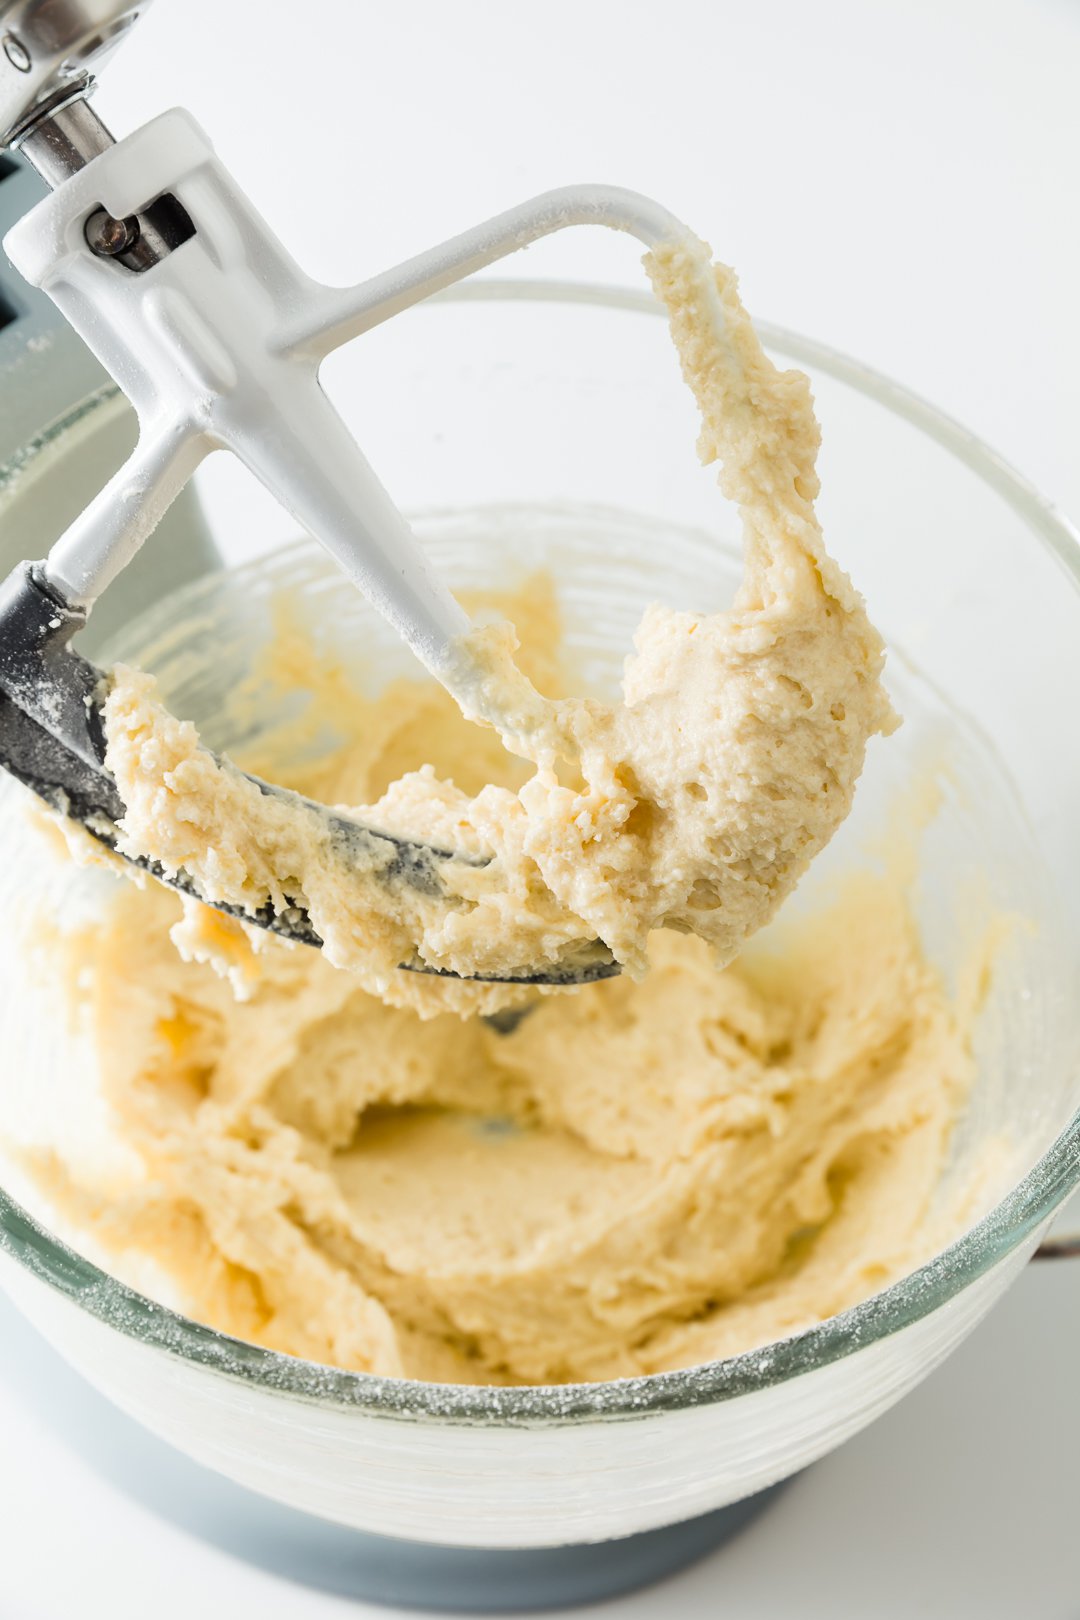 Cupcake batter in the bowl of a stand mixer with the blade lifted